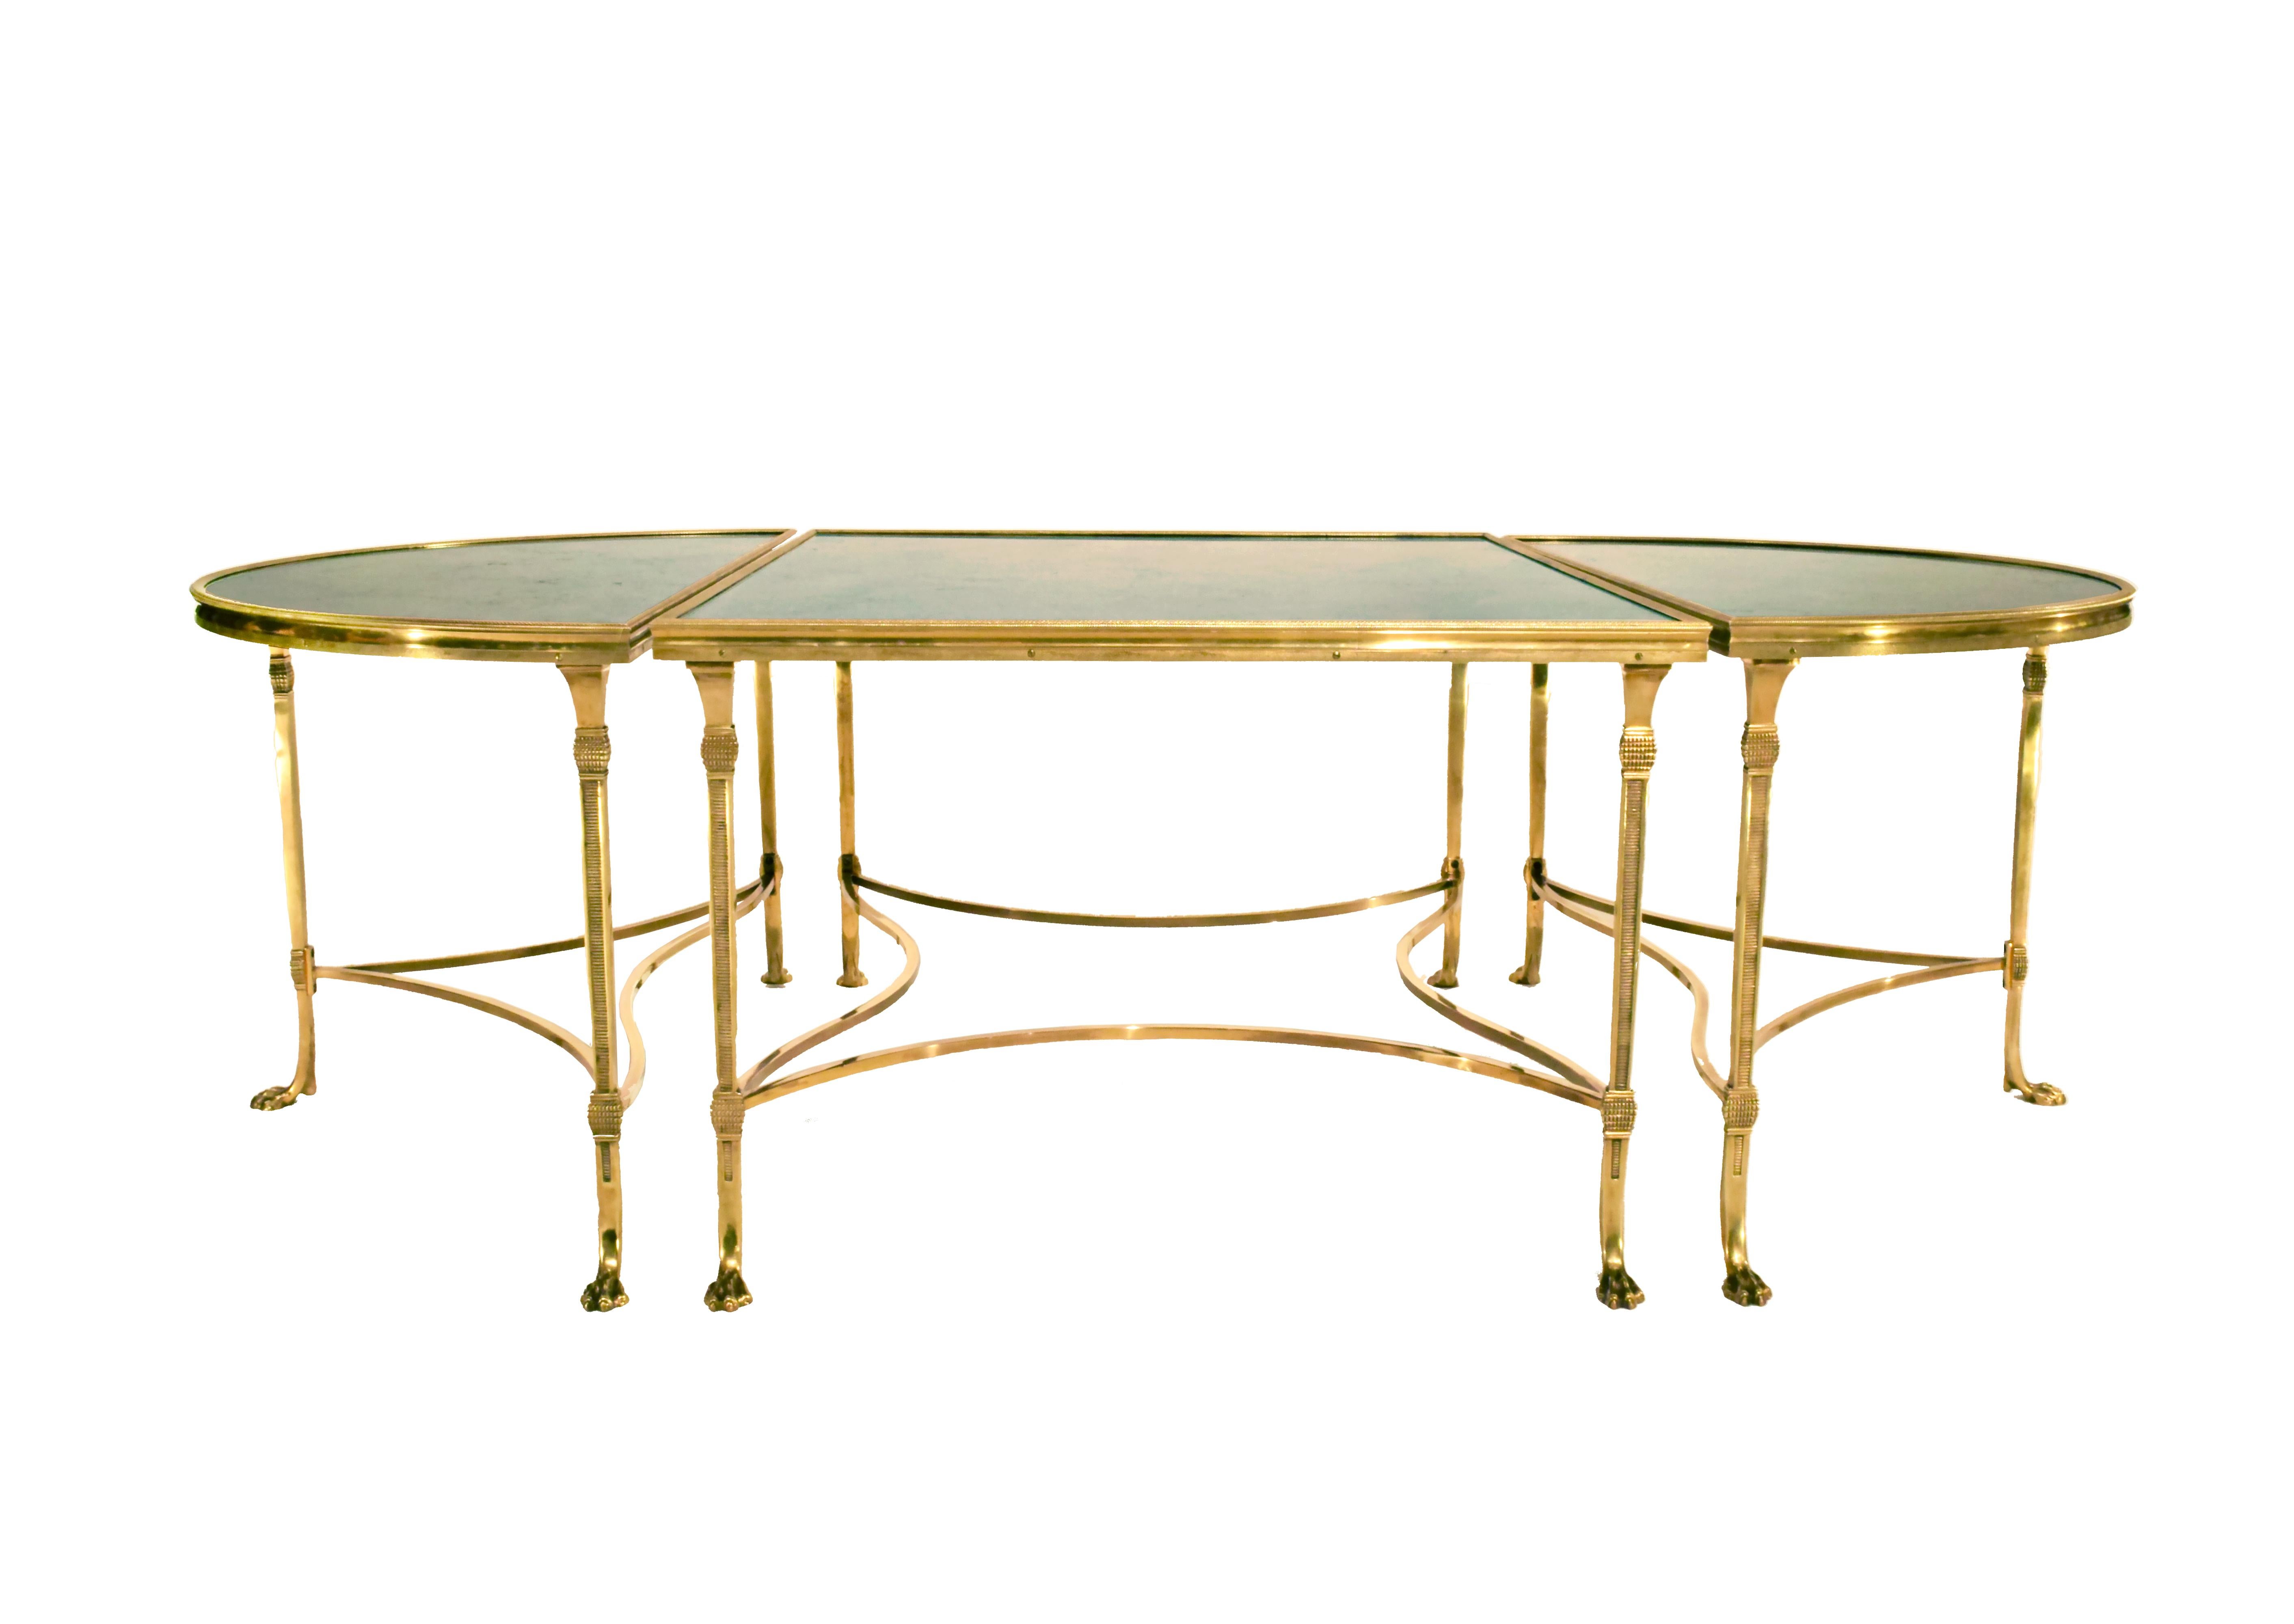 A Maison Jansen design midcentury neoclassical bronze and honed black fossilized marble tripartite cocktail table with a hardwood structural core, manufacture attributed to Maison Bagues, in three parts comprised of a rectangular center section and